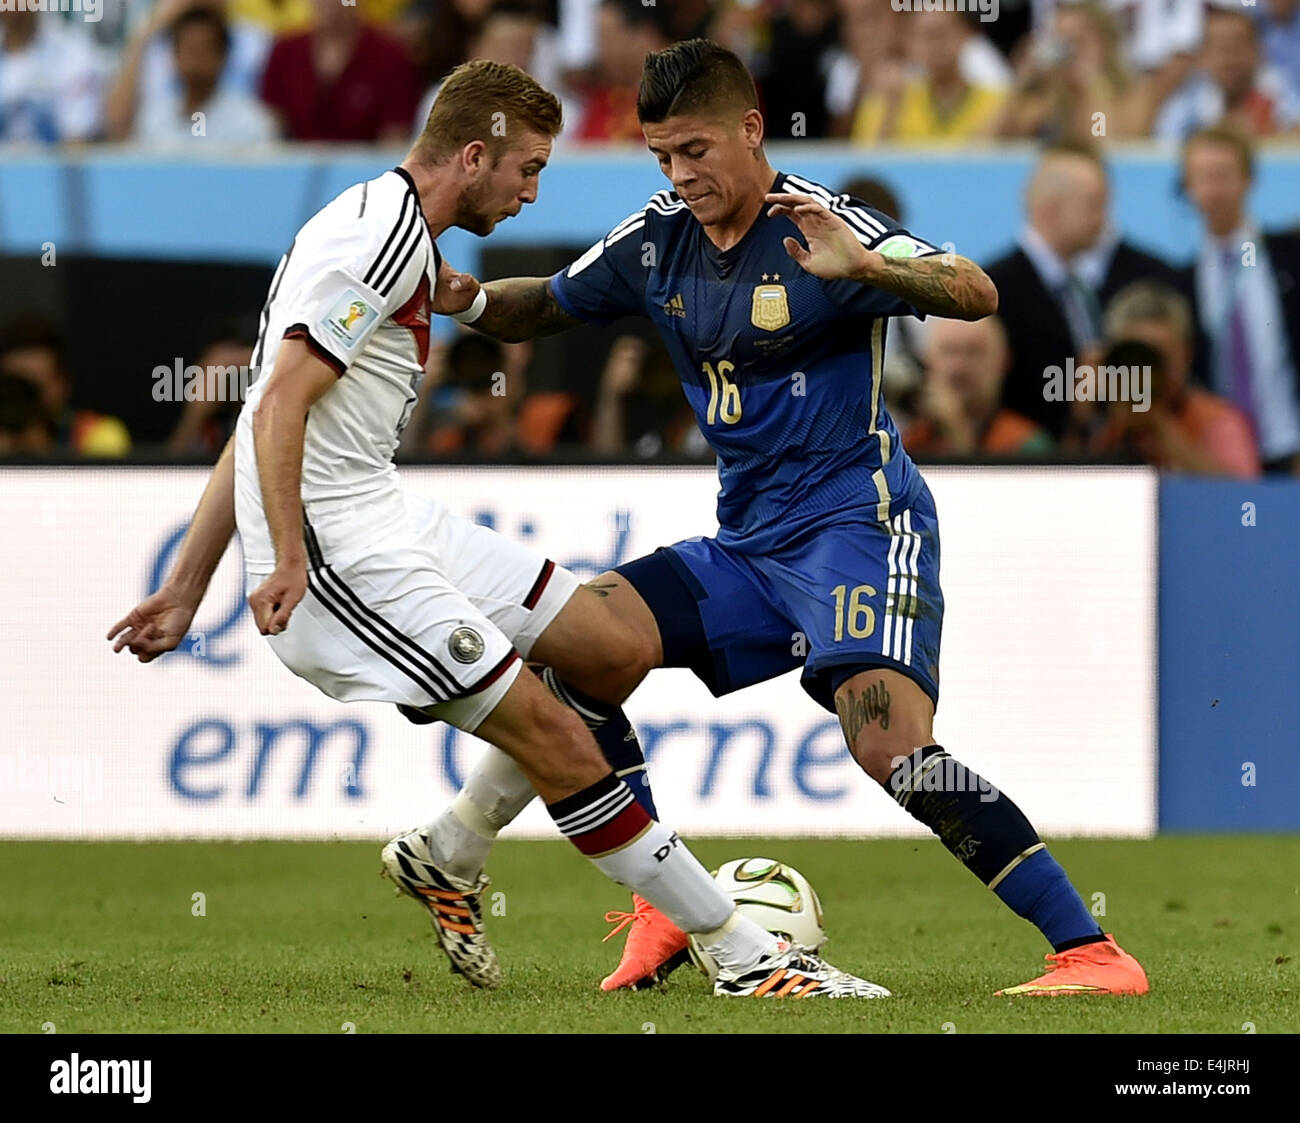 Rio De Janeiro, Brazil. 13th July, 2014. Germany's Toni Kroos (L) vies with Argentina's Marcos Rojo during the final match between Germany and Argentina of 2014 FIFA World Cup at the Estadio do Maracana Stadium in Rio de Janeiro, Brazil, on July 13, 2014. Credit:  Qi Heng/Xinhua/Alamy Live News Stock Photo